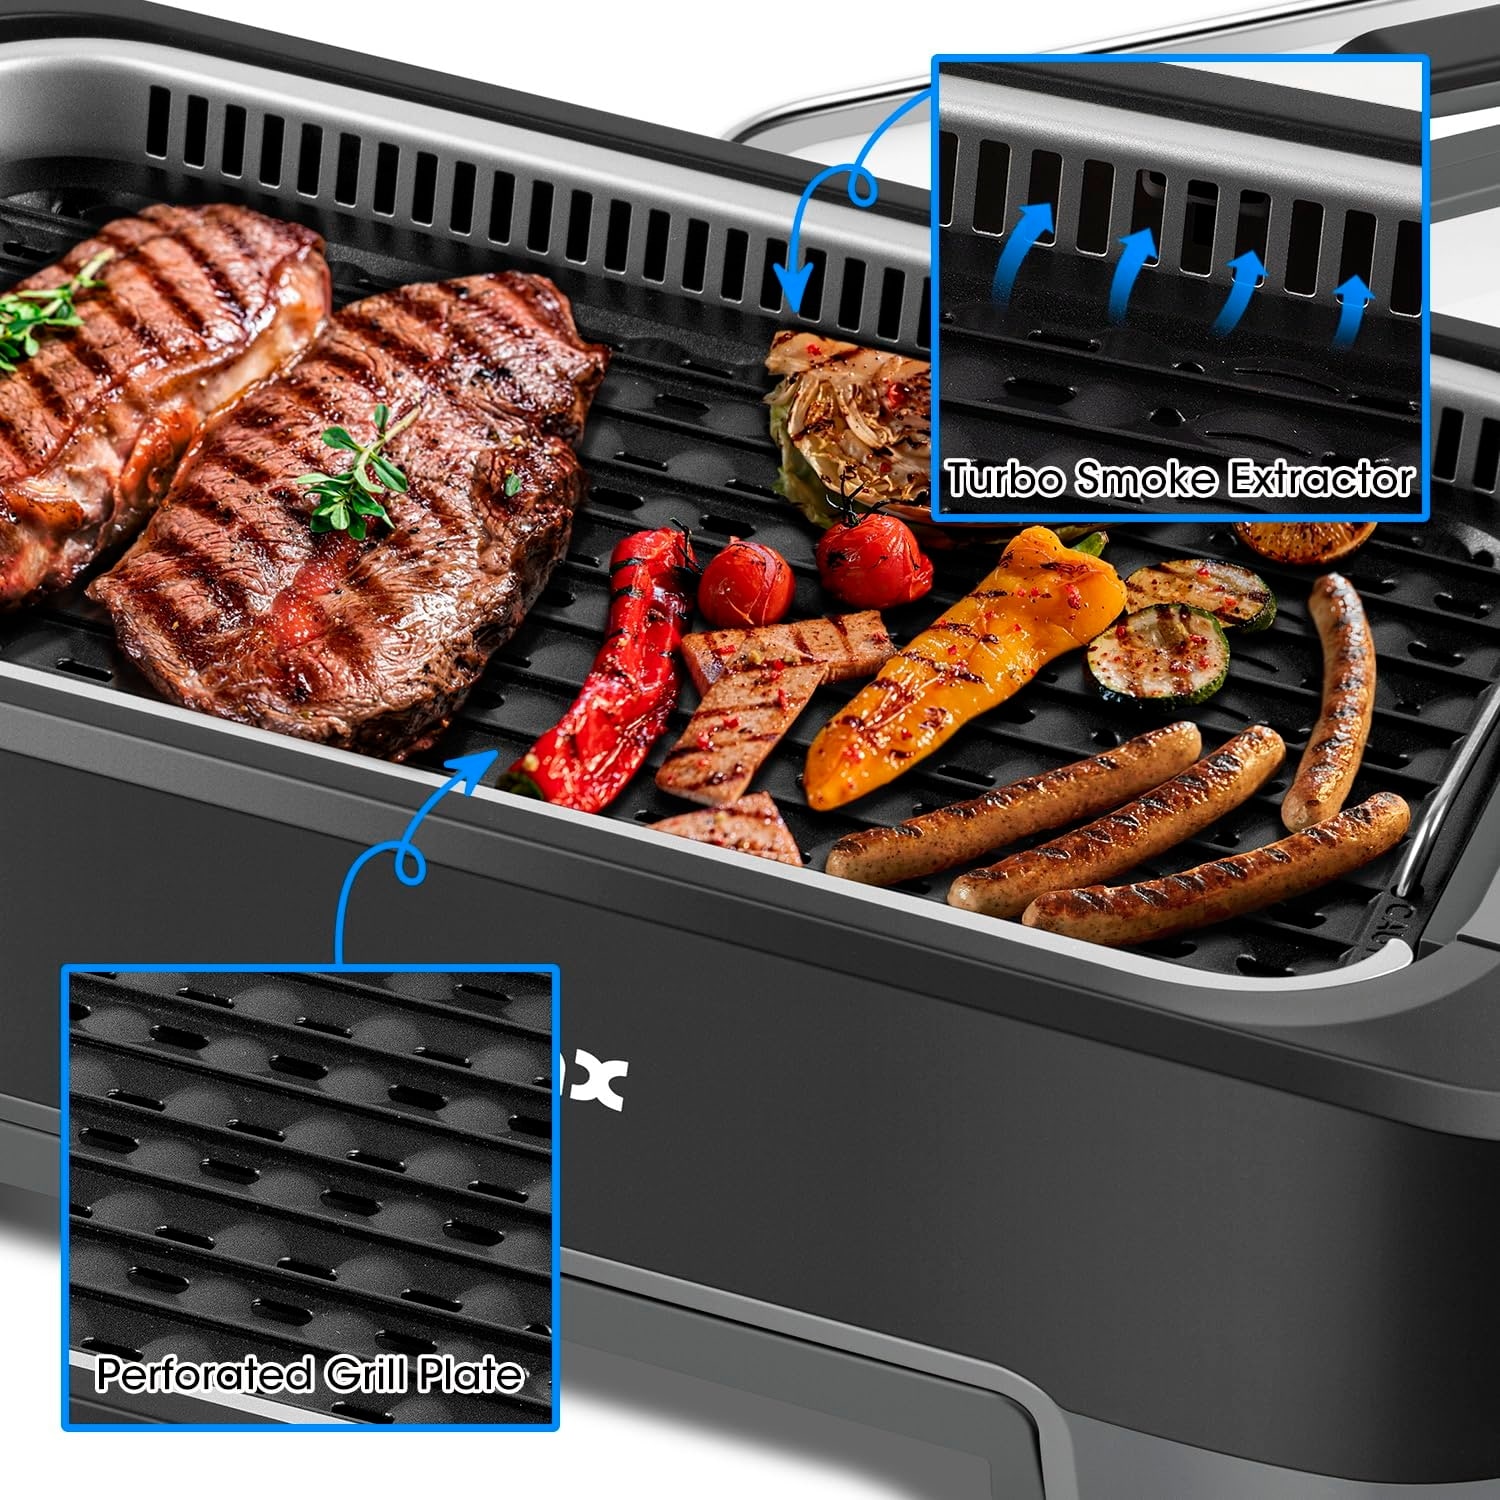 Cusimax Smokeless Electric Grill with Turbo Smoke Extractor, Portable